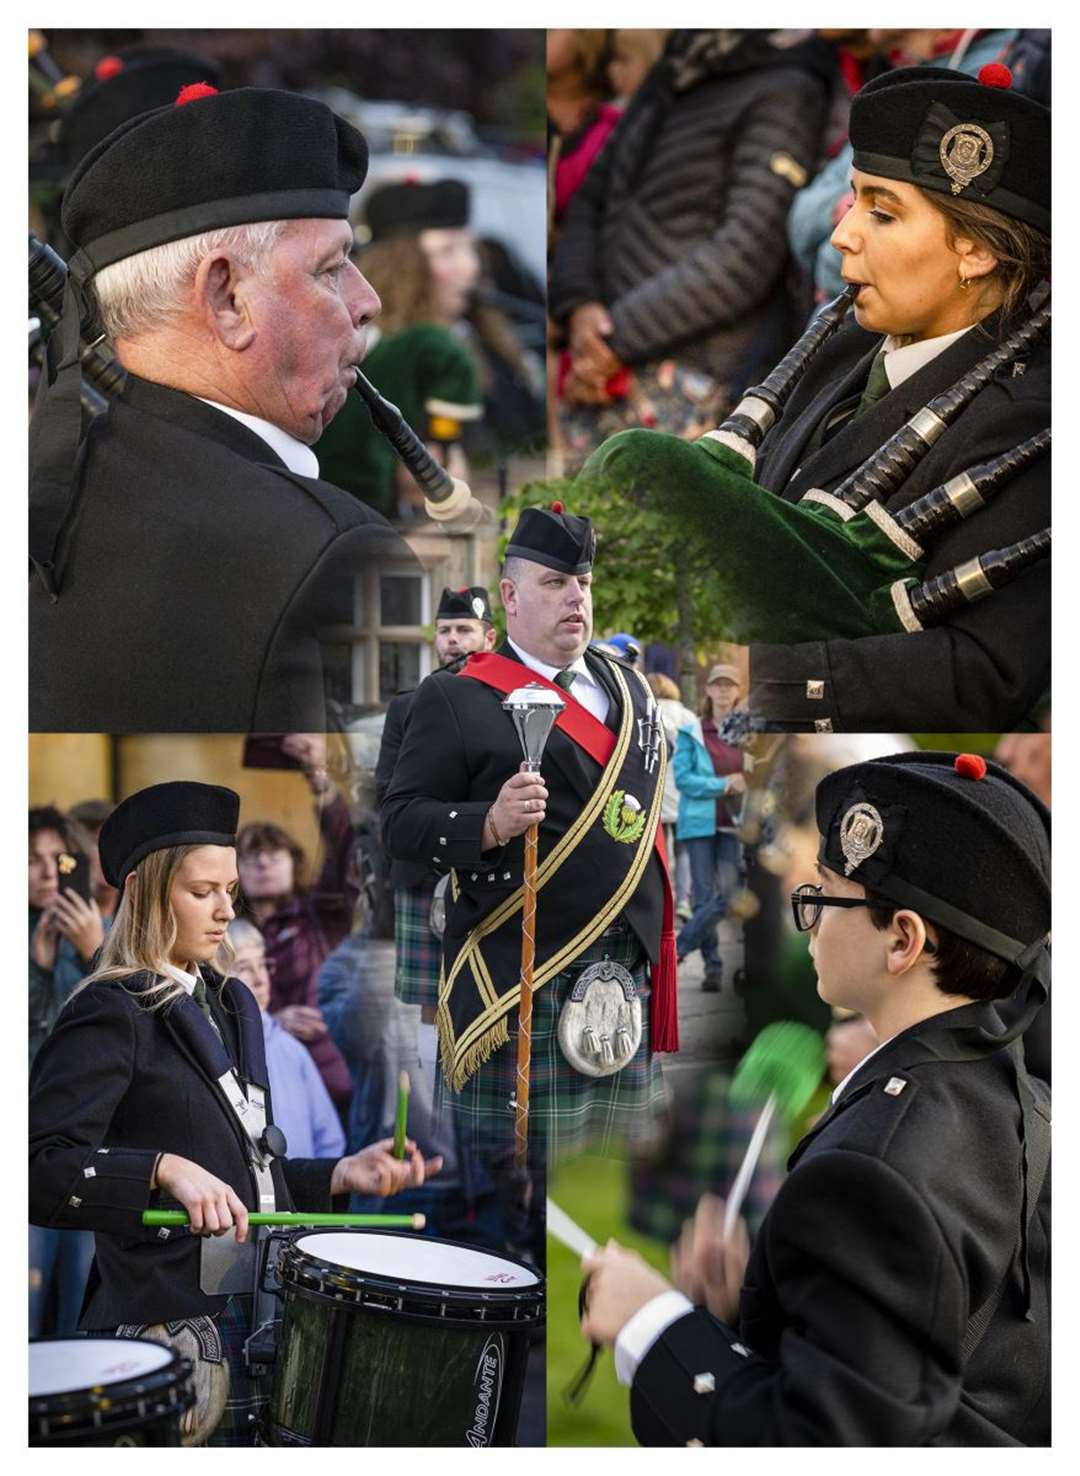 Andy Kirby chose the postcard approach with Dornoch Pipe Band which saw him awarded second place in the colour section.